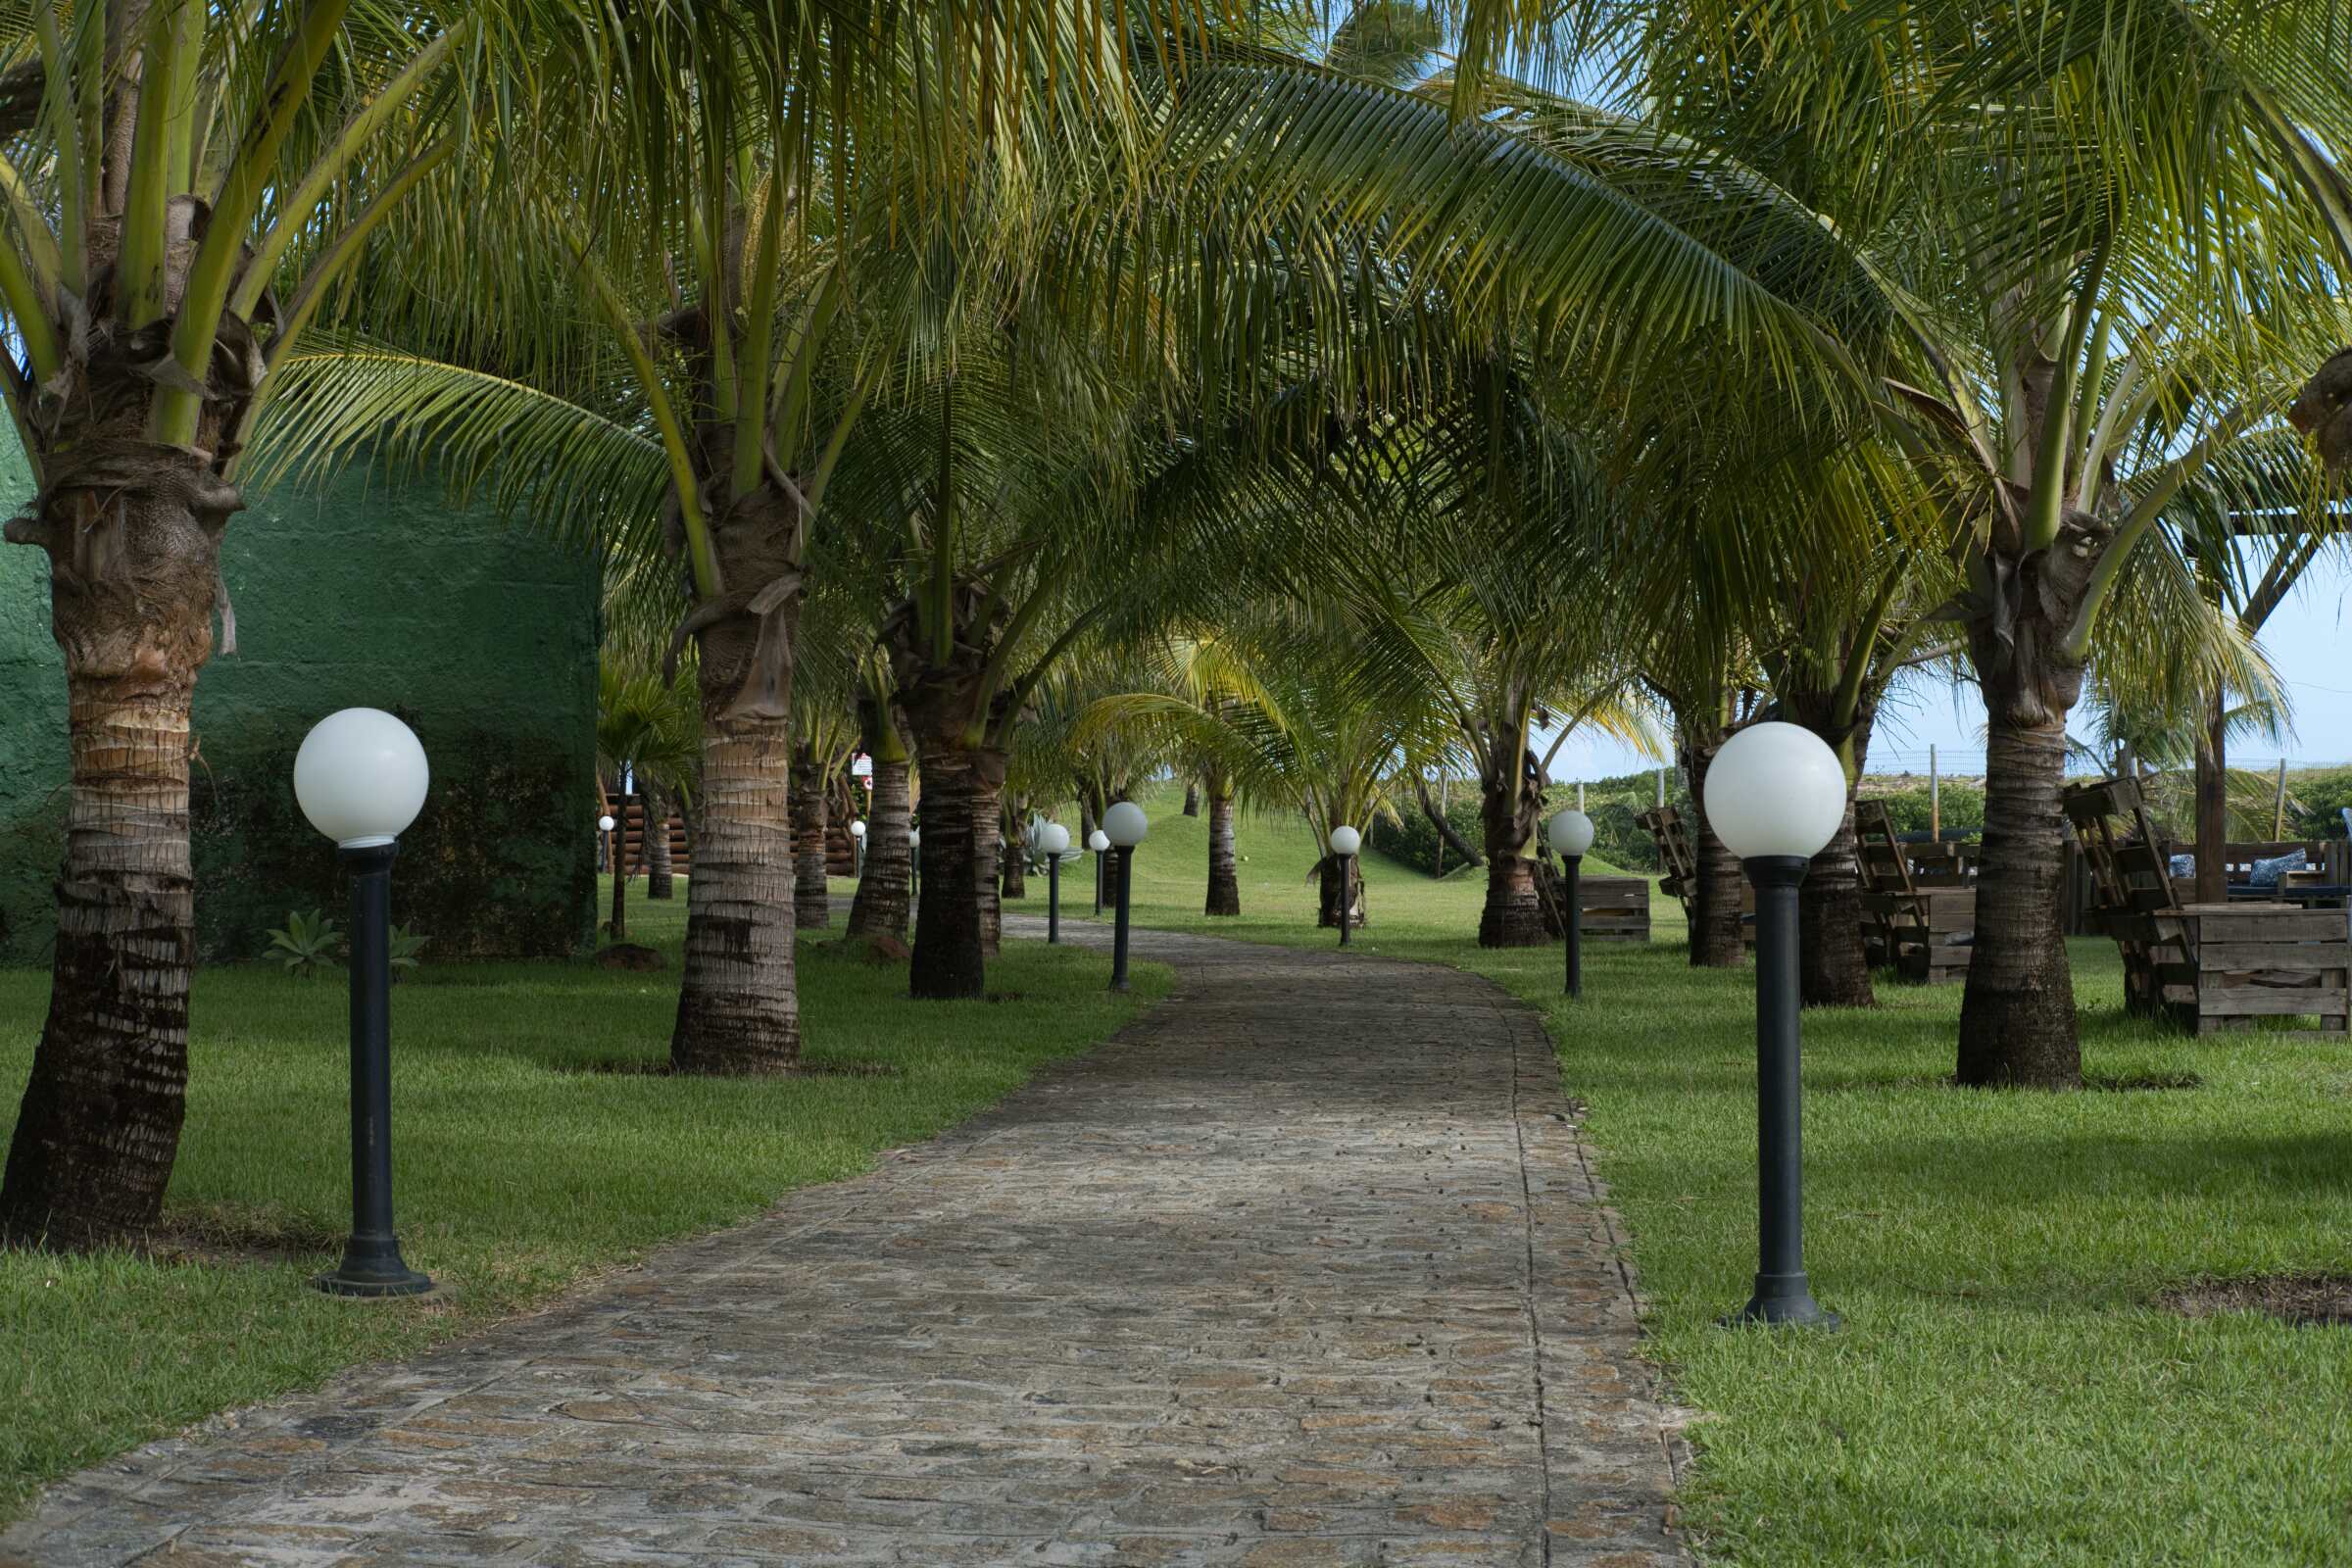 A walkway in a tropical place unedited.